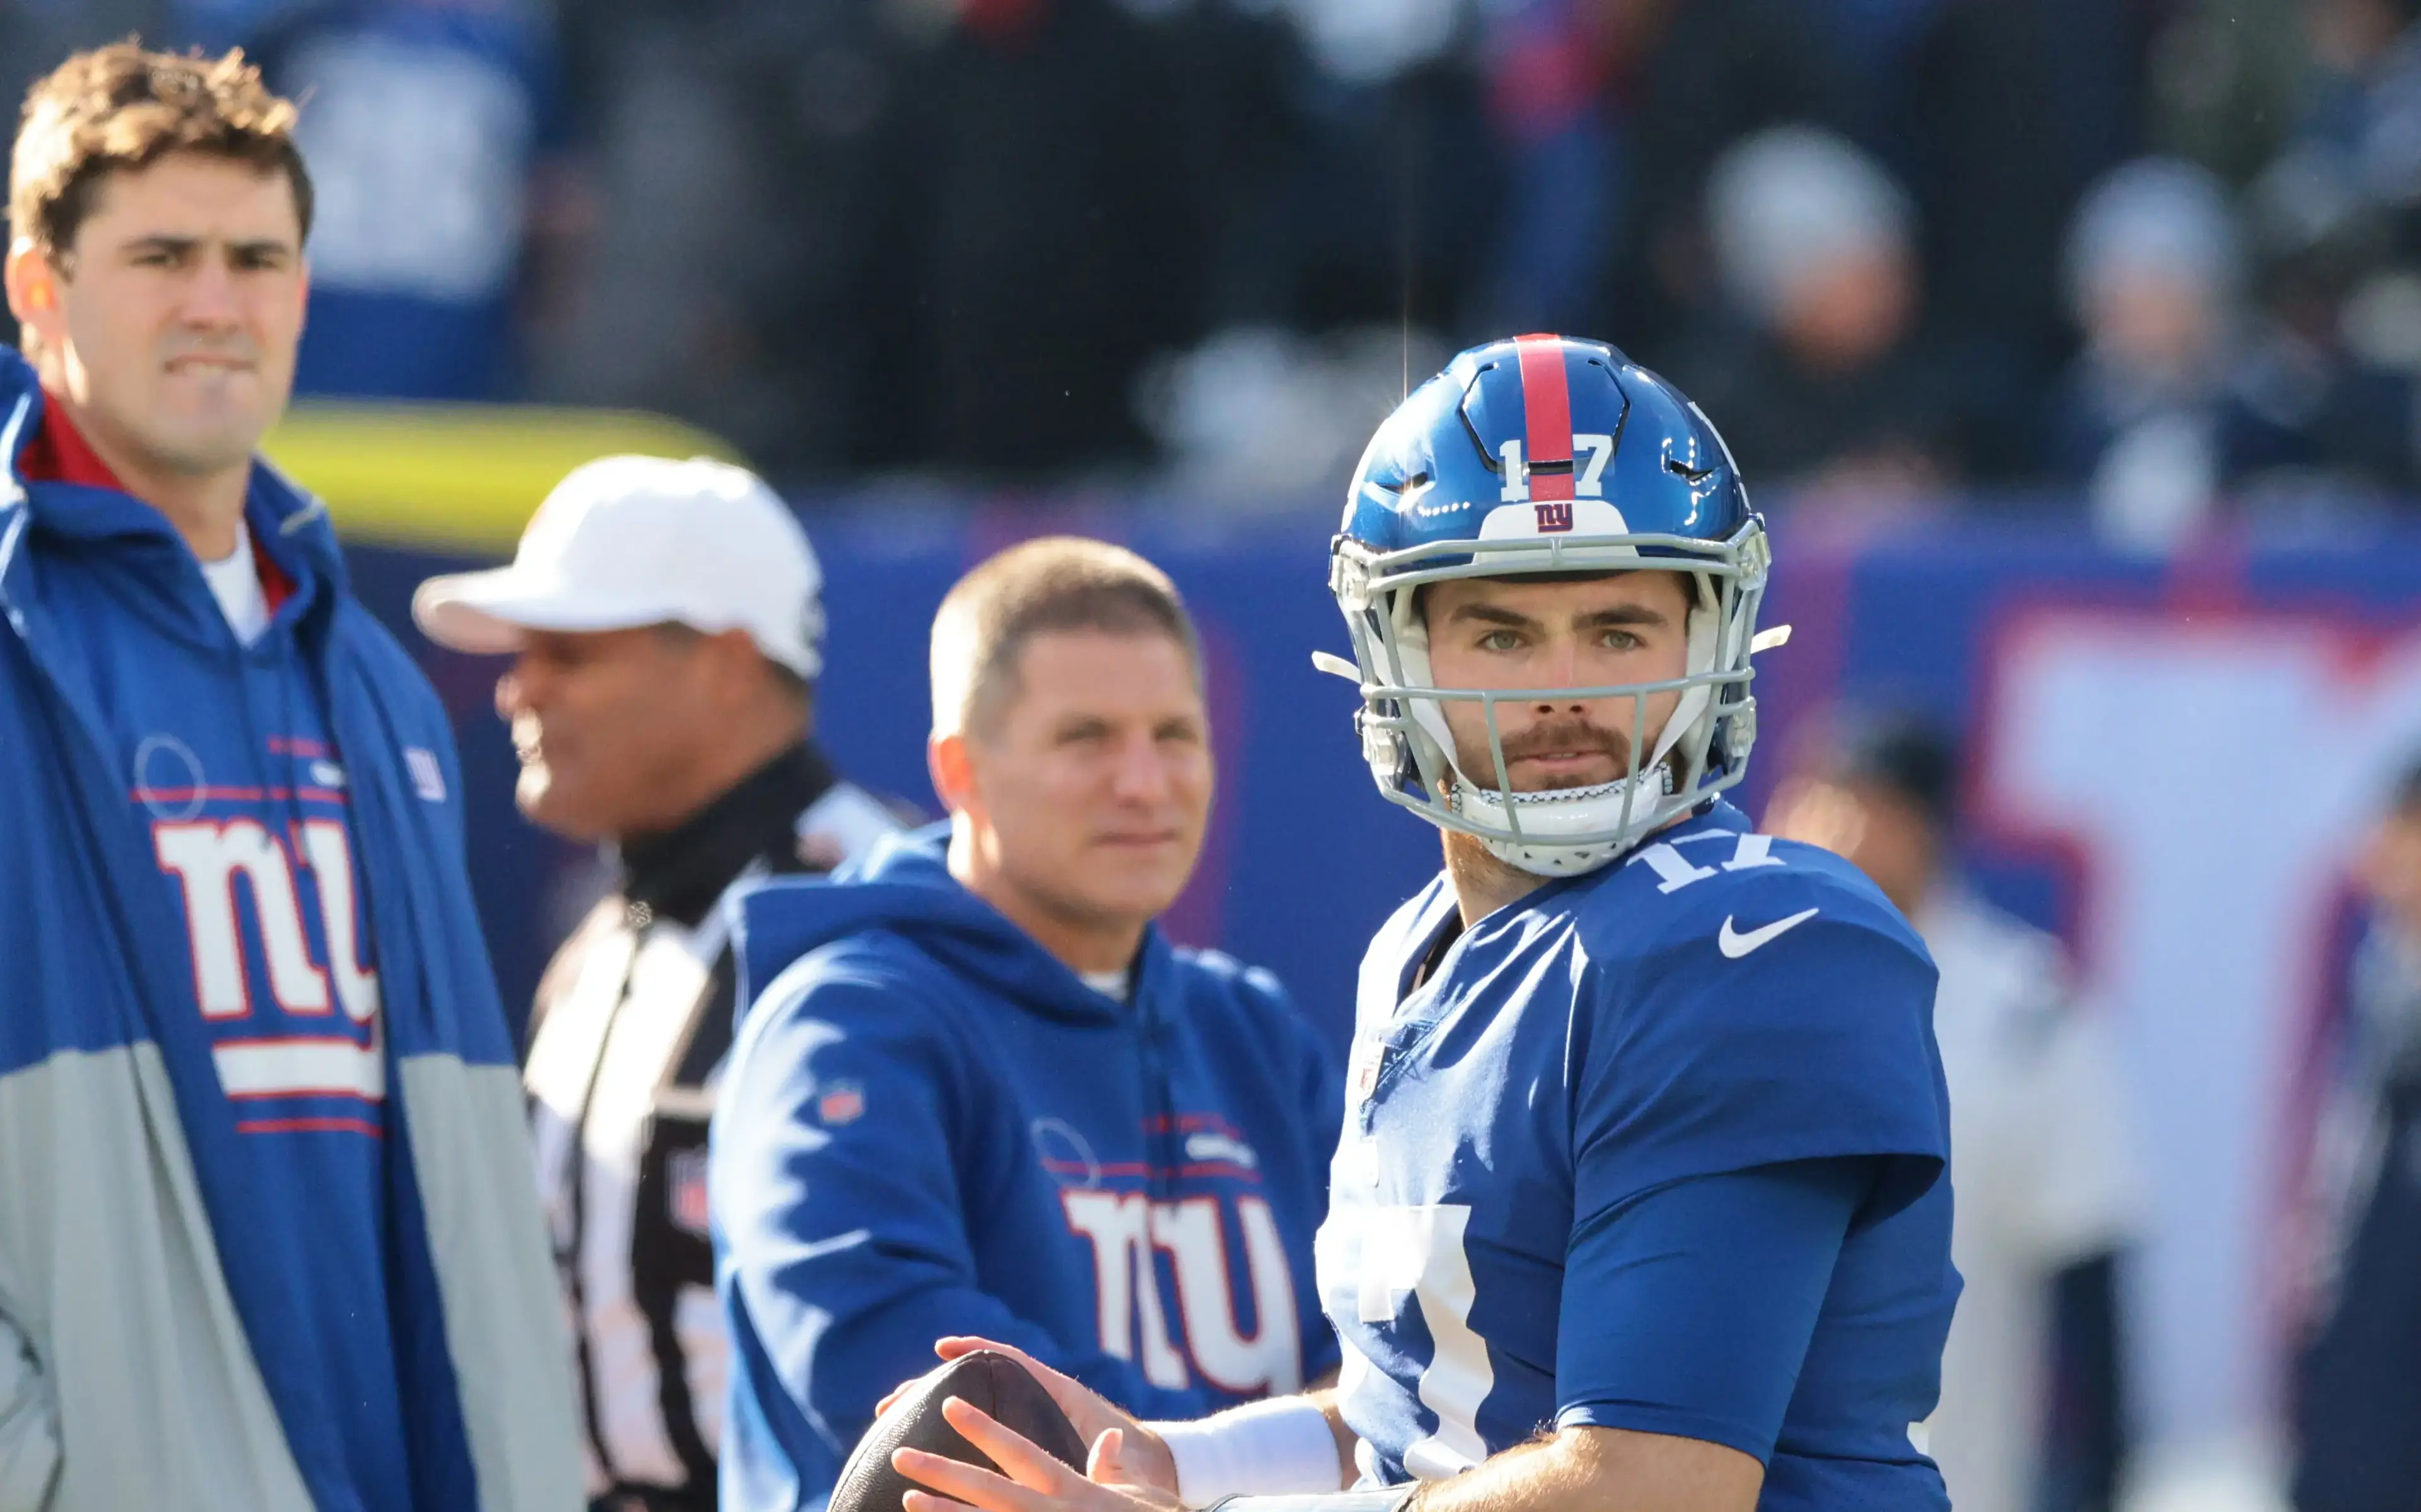 Dec 19, 2021; East Rutherford, New Jersey, USA; New York Giants quarterback Jake Fromm (17) throws the ball as quarterback Daniel Jones (8) looks on before the game against the Dallas Cowboys at MetLife Stadium. Mandatory Credit: Vincent Carchietta-USA TODAY Sports / © Vincent Carchietta-USA TODAY Sports